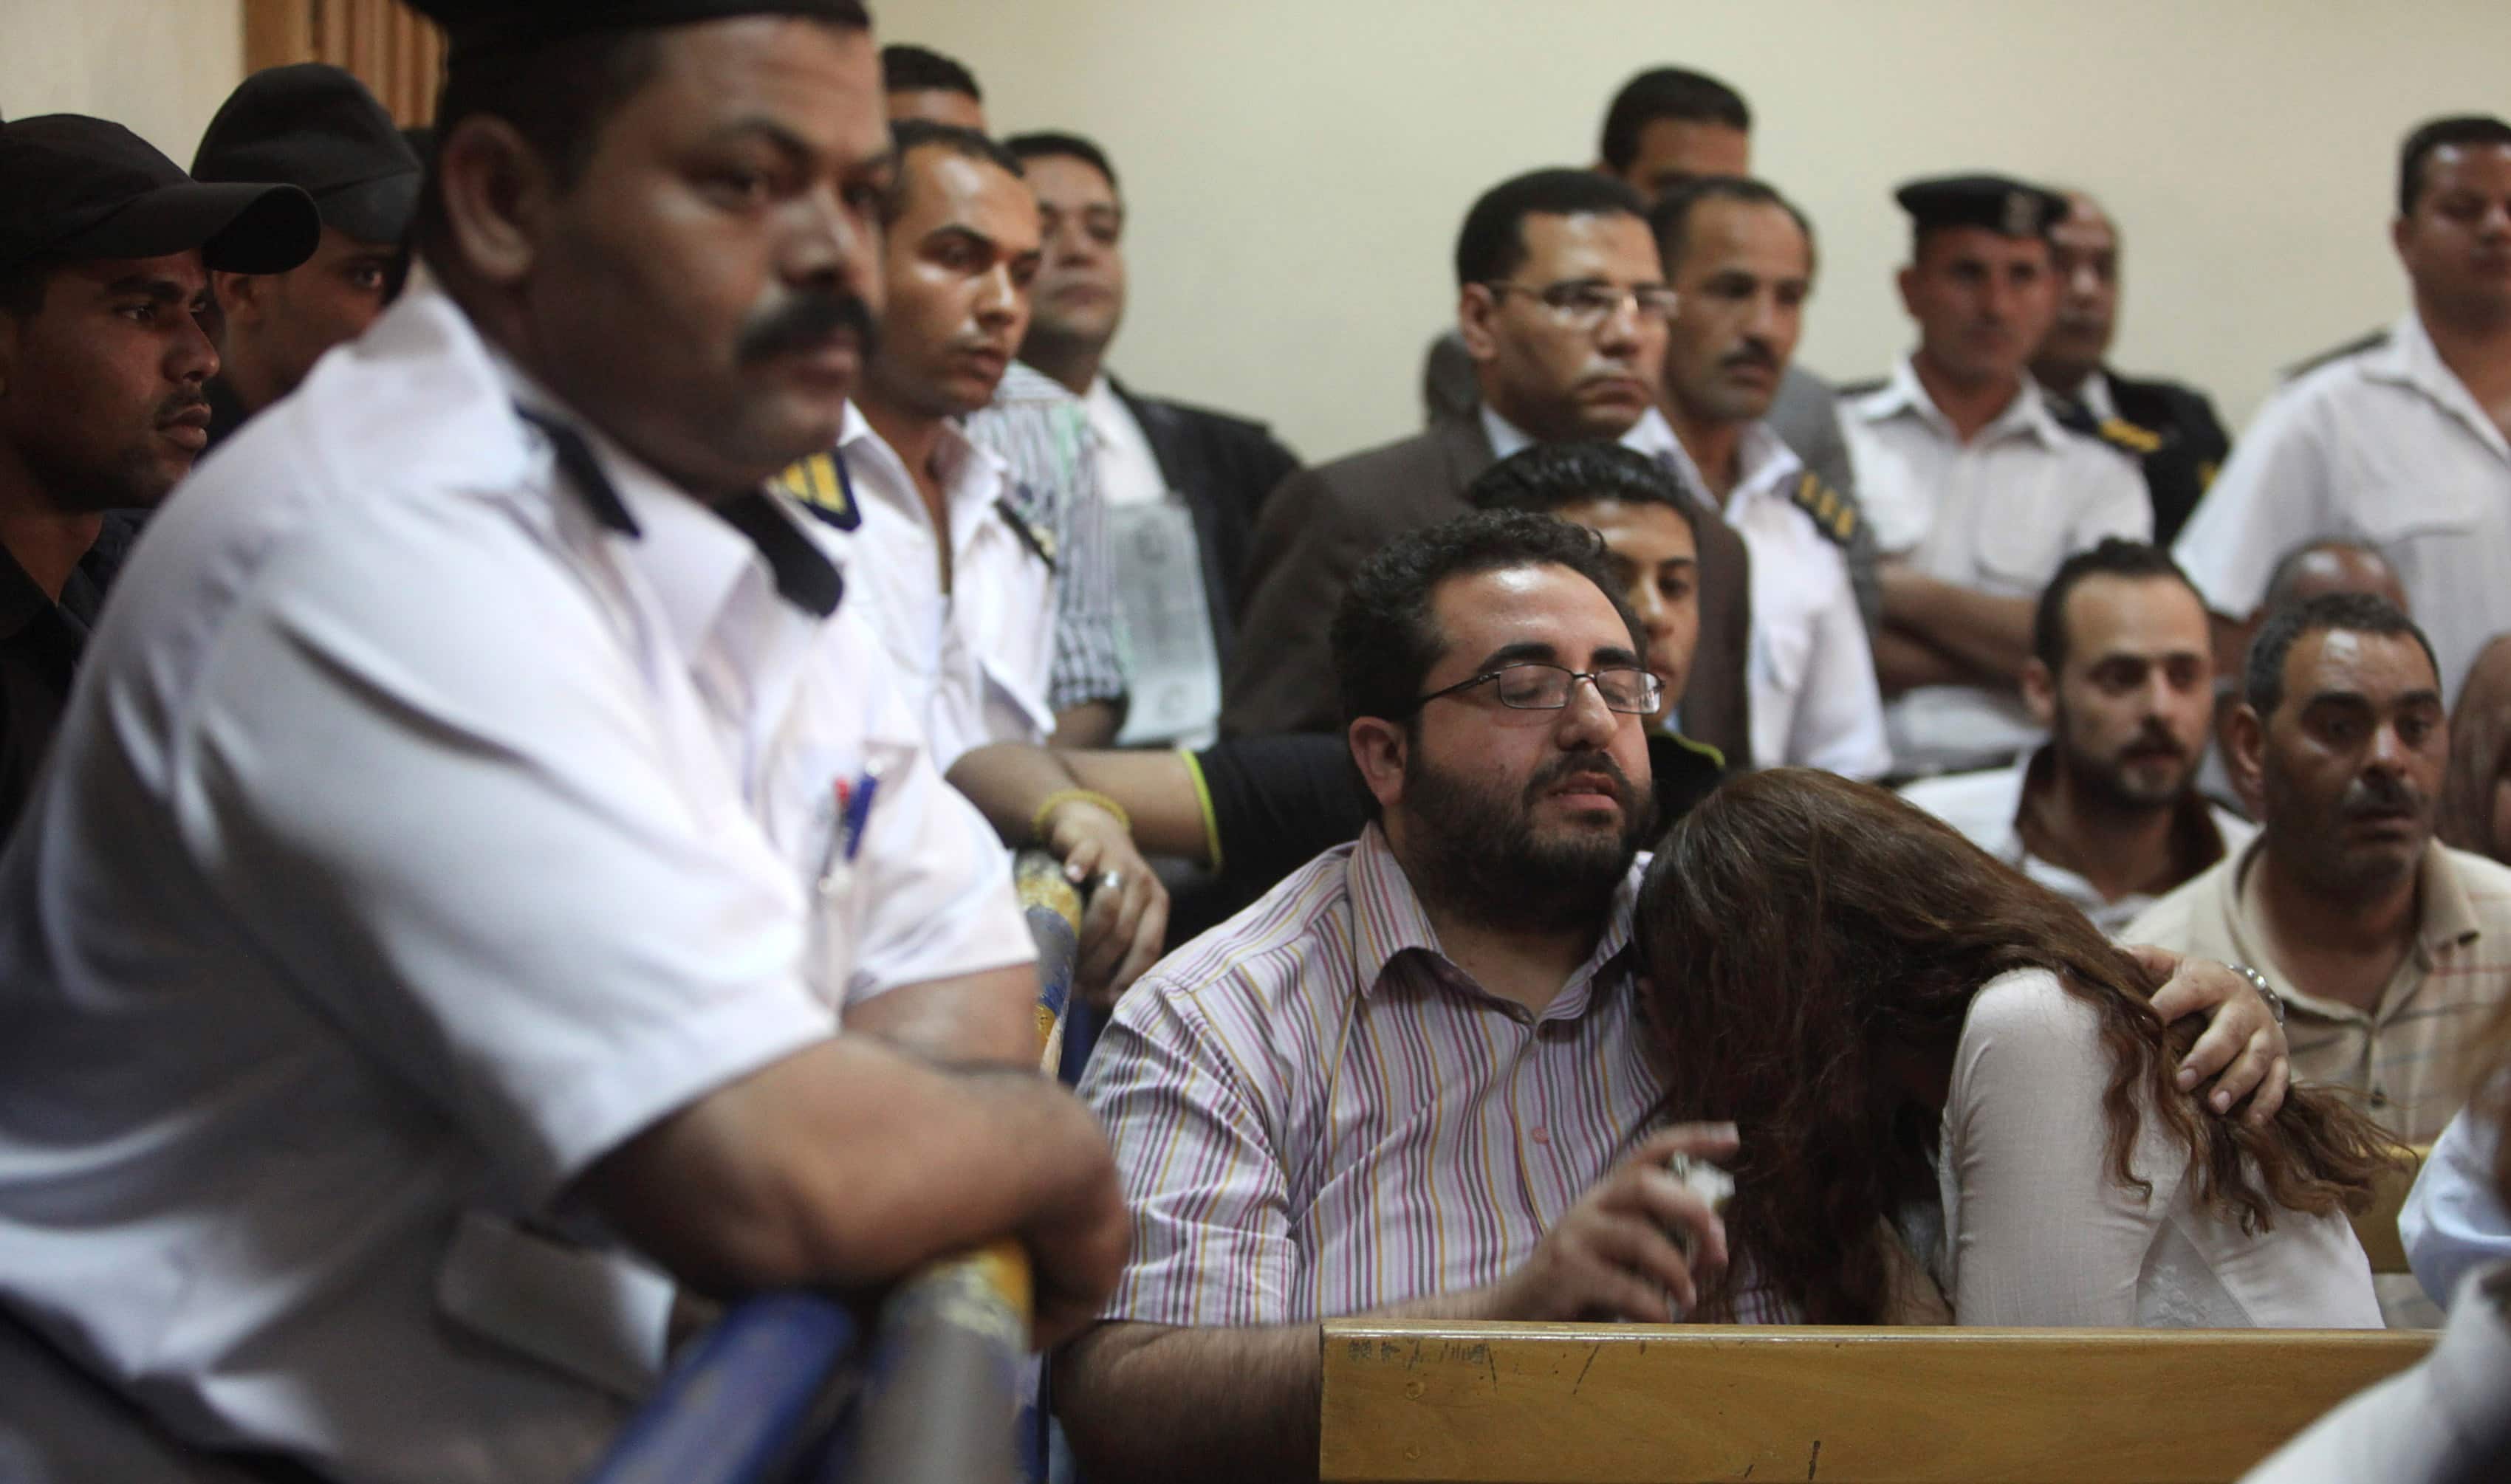 The defendants' friends react to the judge's verdict during foreign NGOs case on 4 June, REUTERS/Asmaa Waguih